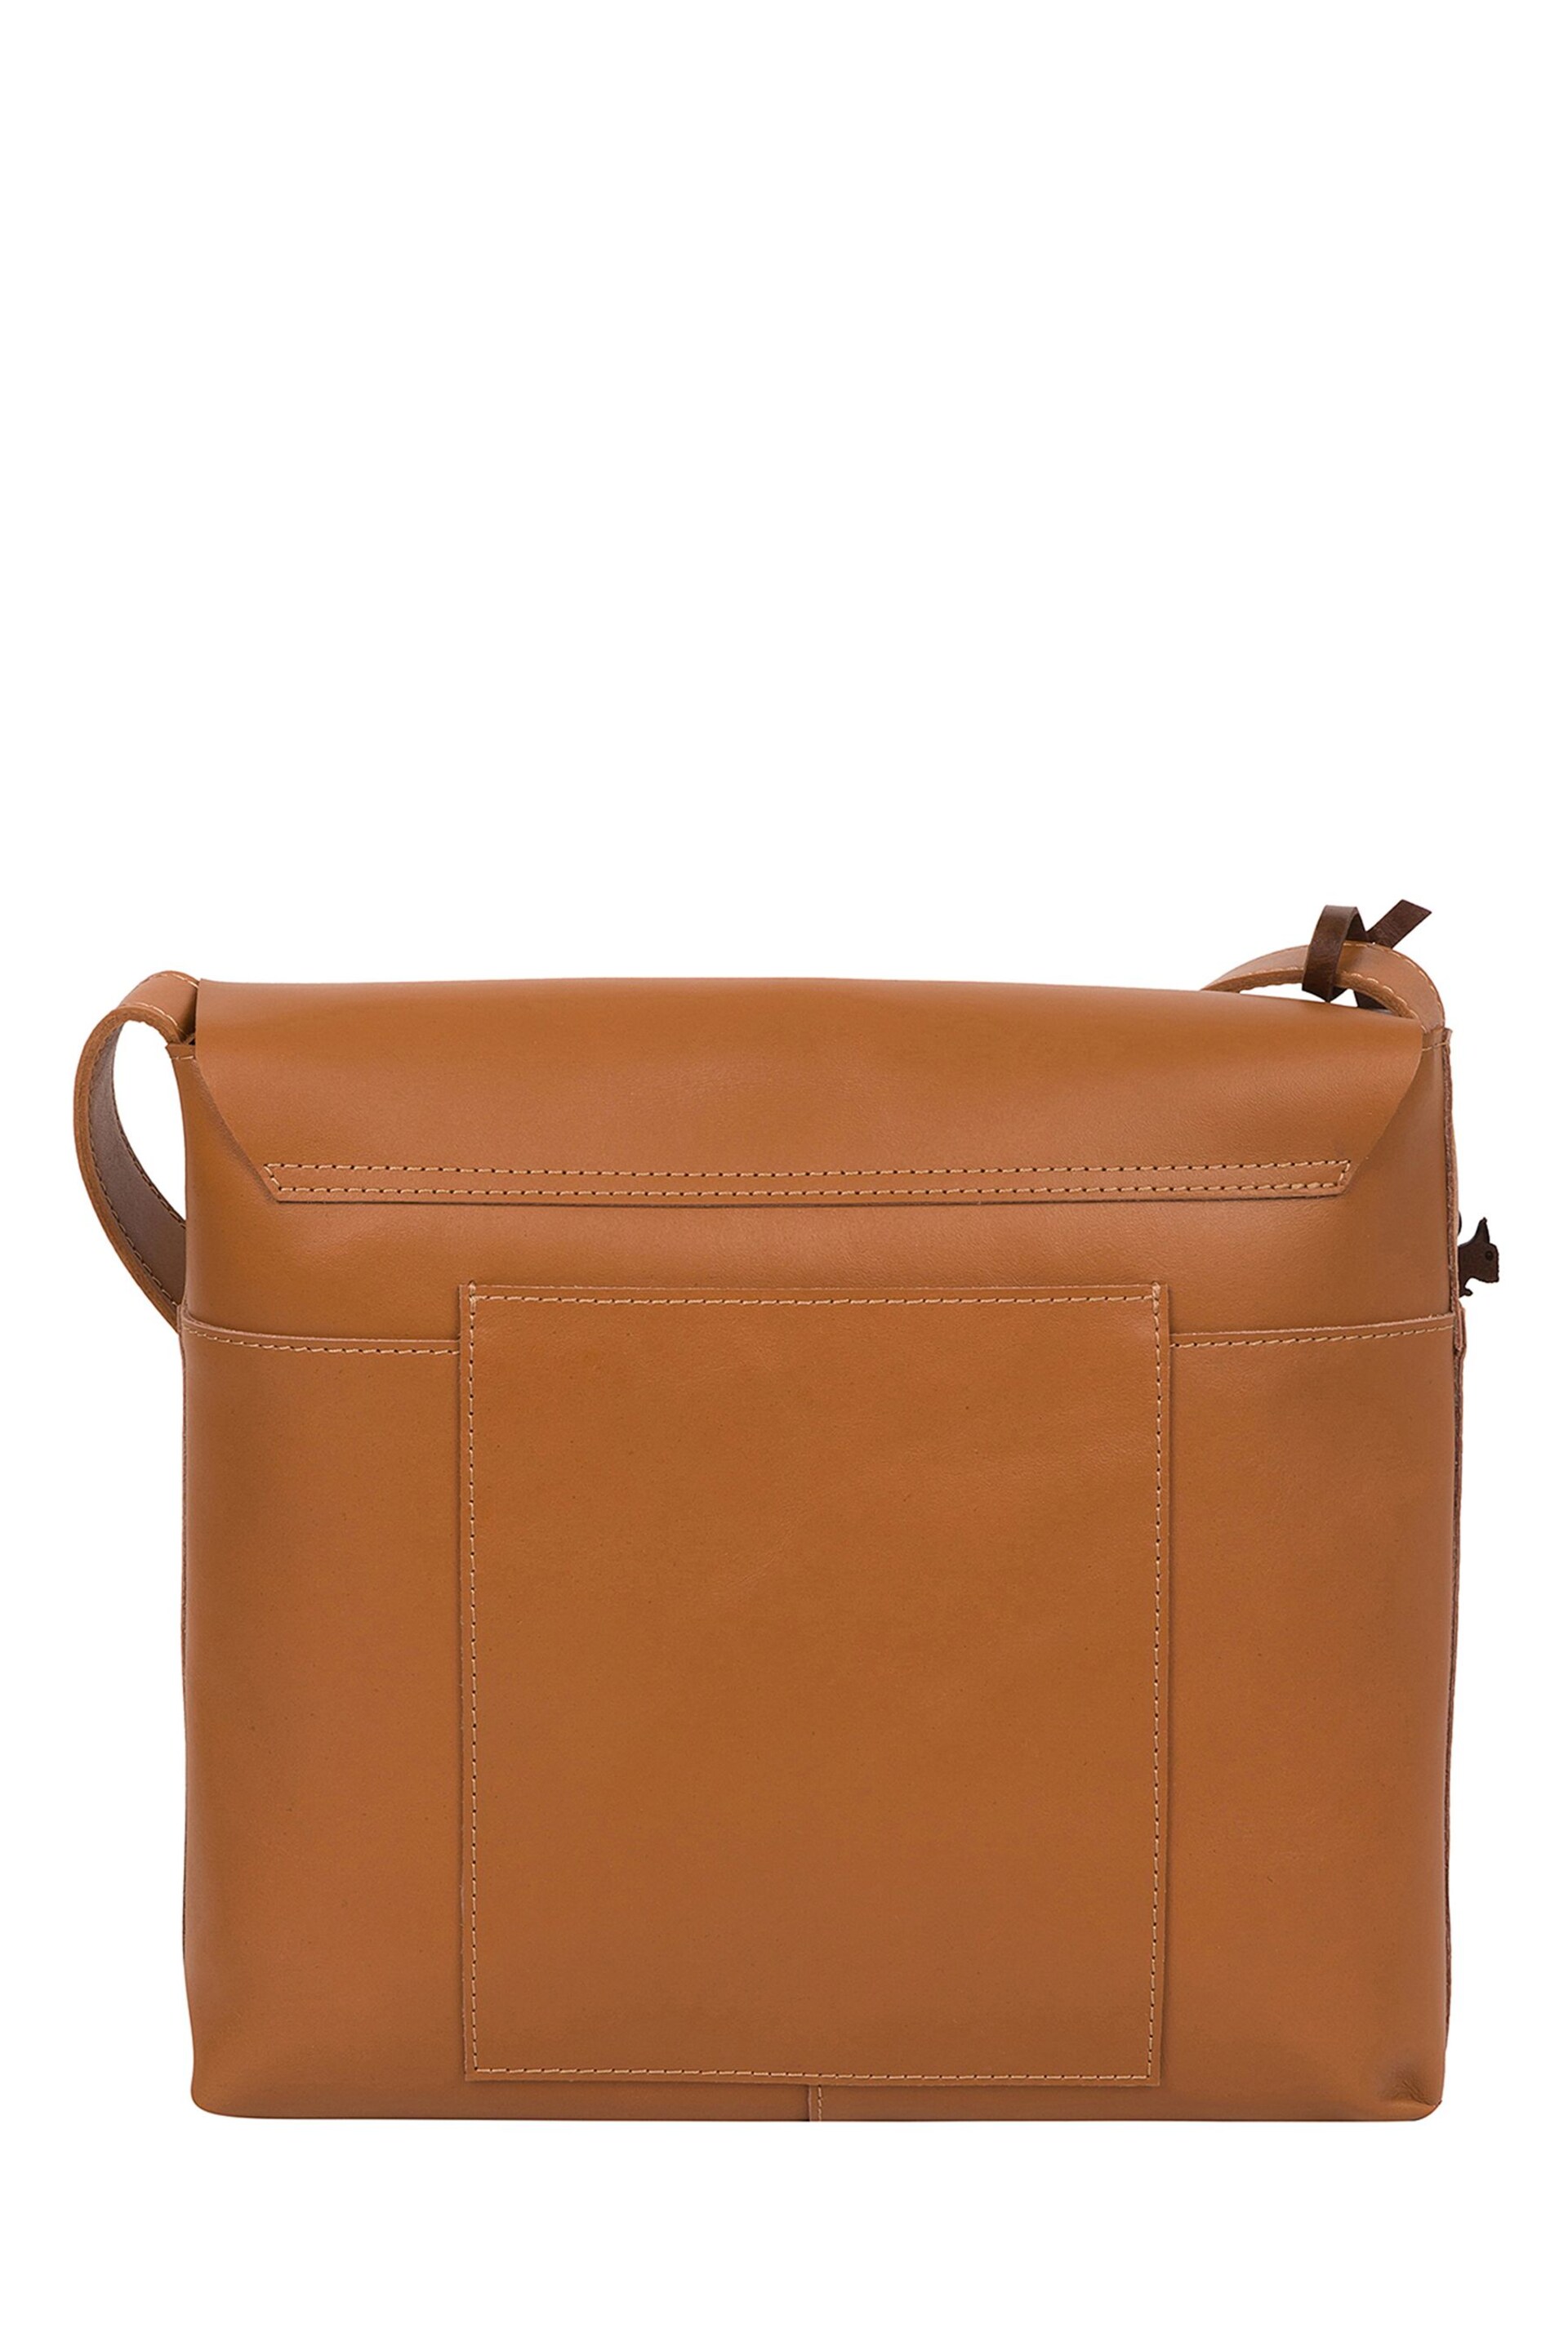 Conkca Bale Vegetable-Tanned Leather Cross-Body Bag - Image 3 of 5